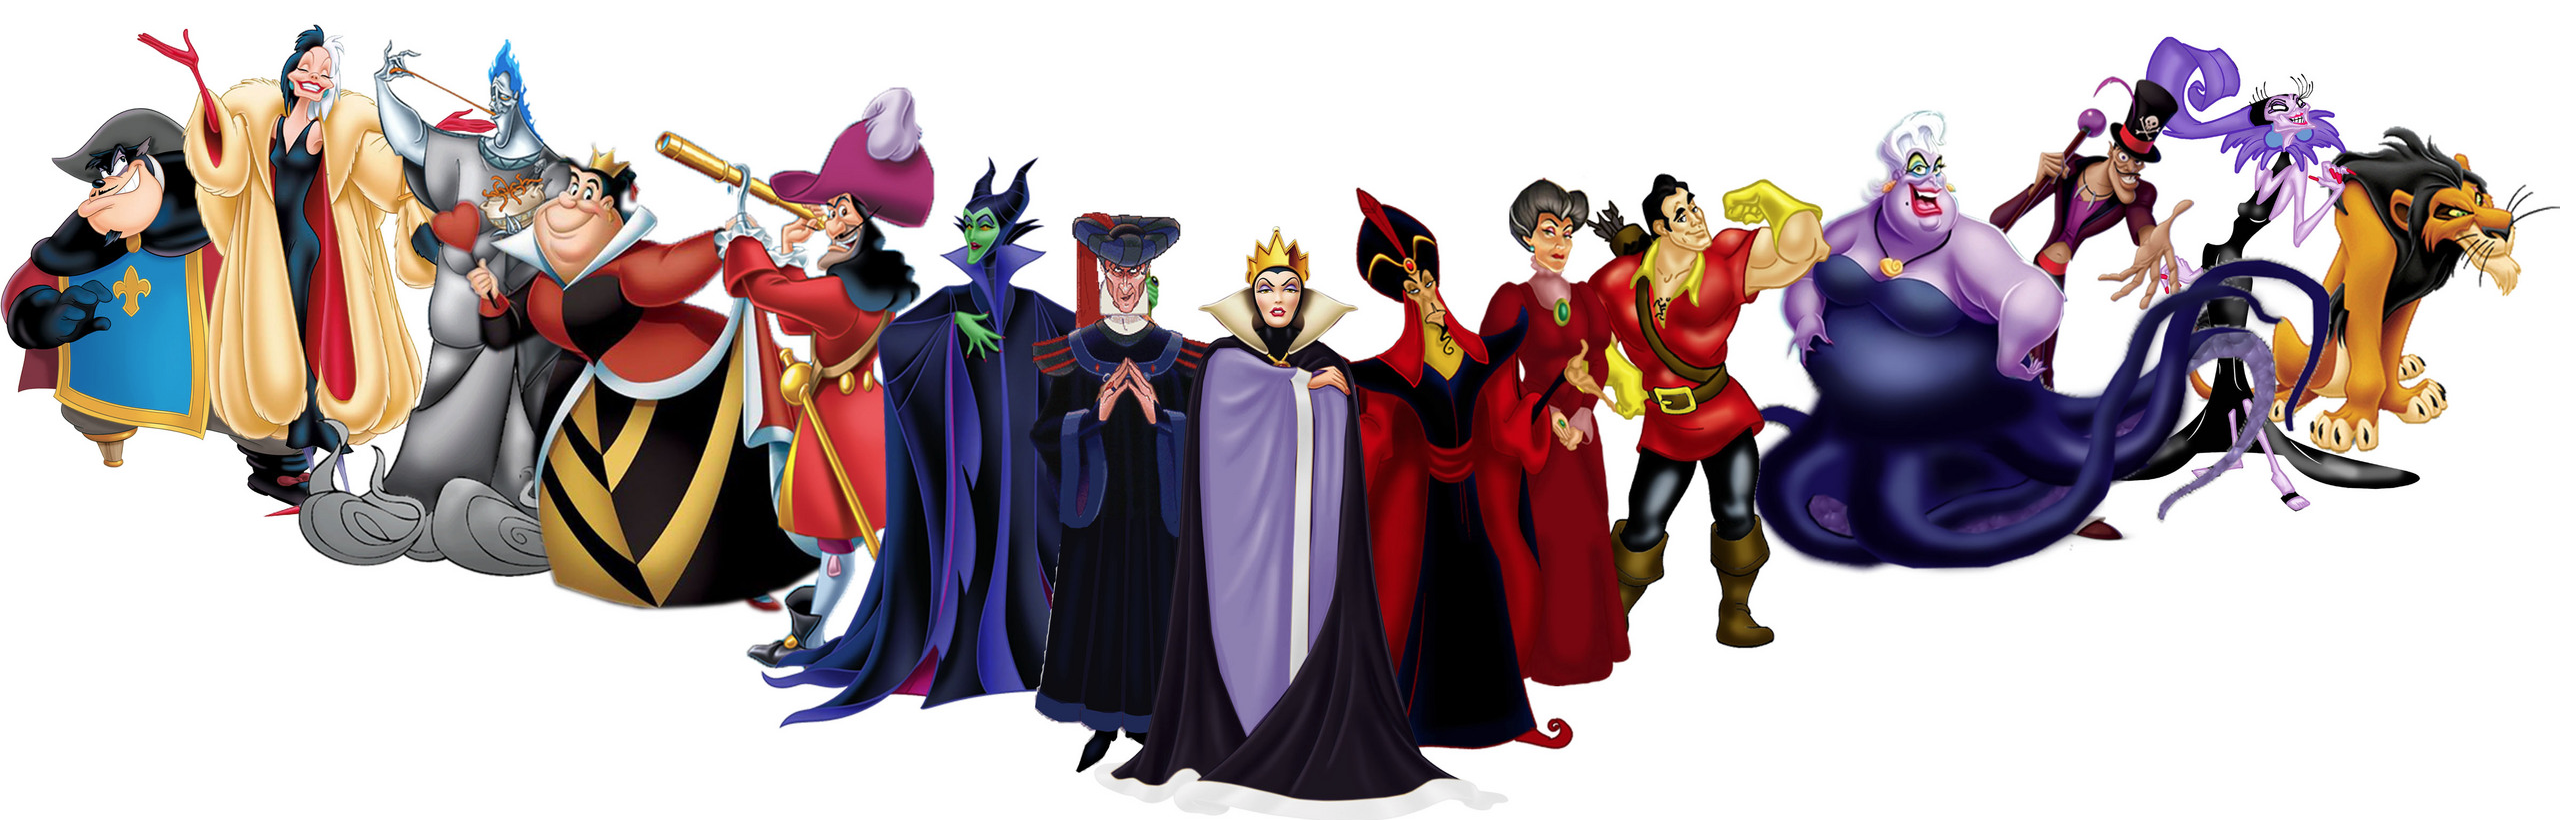 Disney Villains: Where Are They Now?